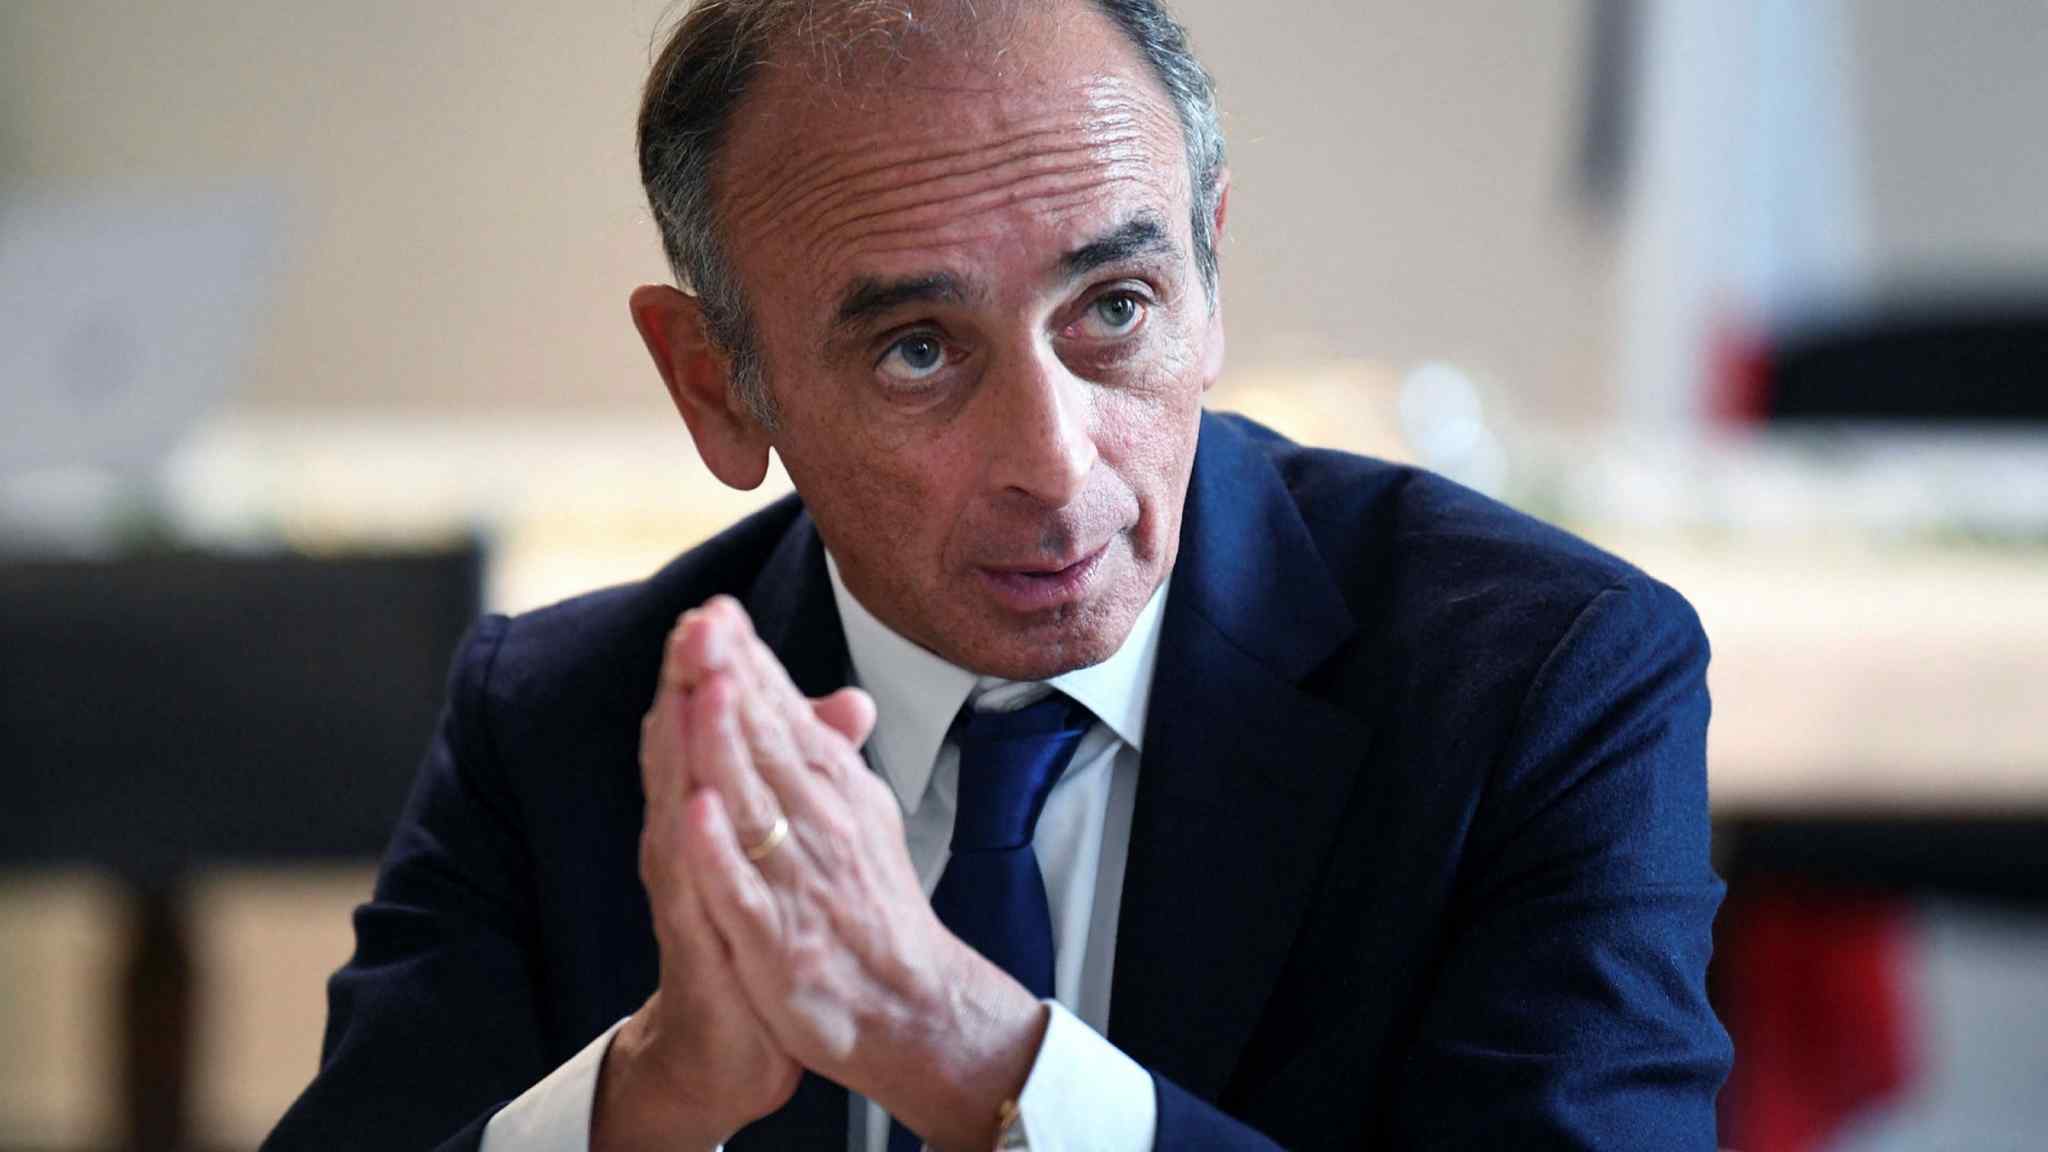 French presidential candidate Zemmour convicted of hate speech